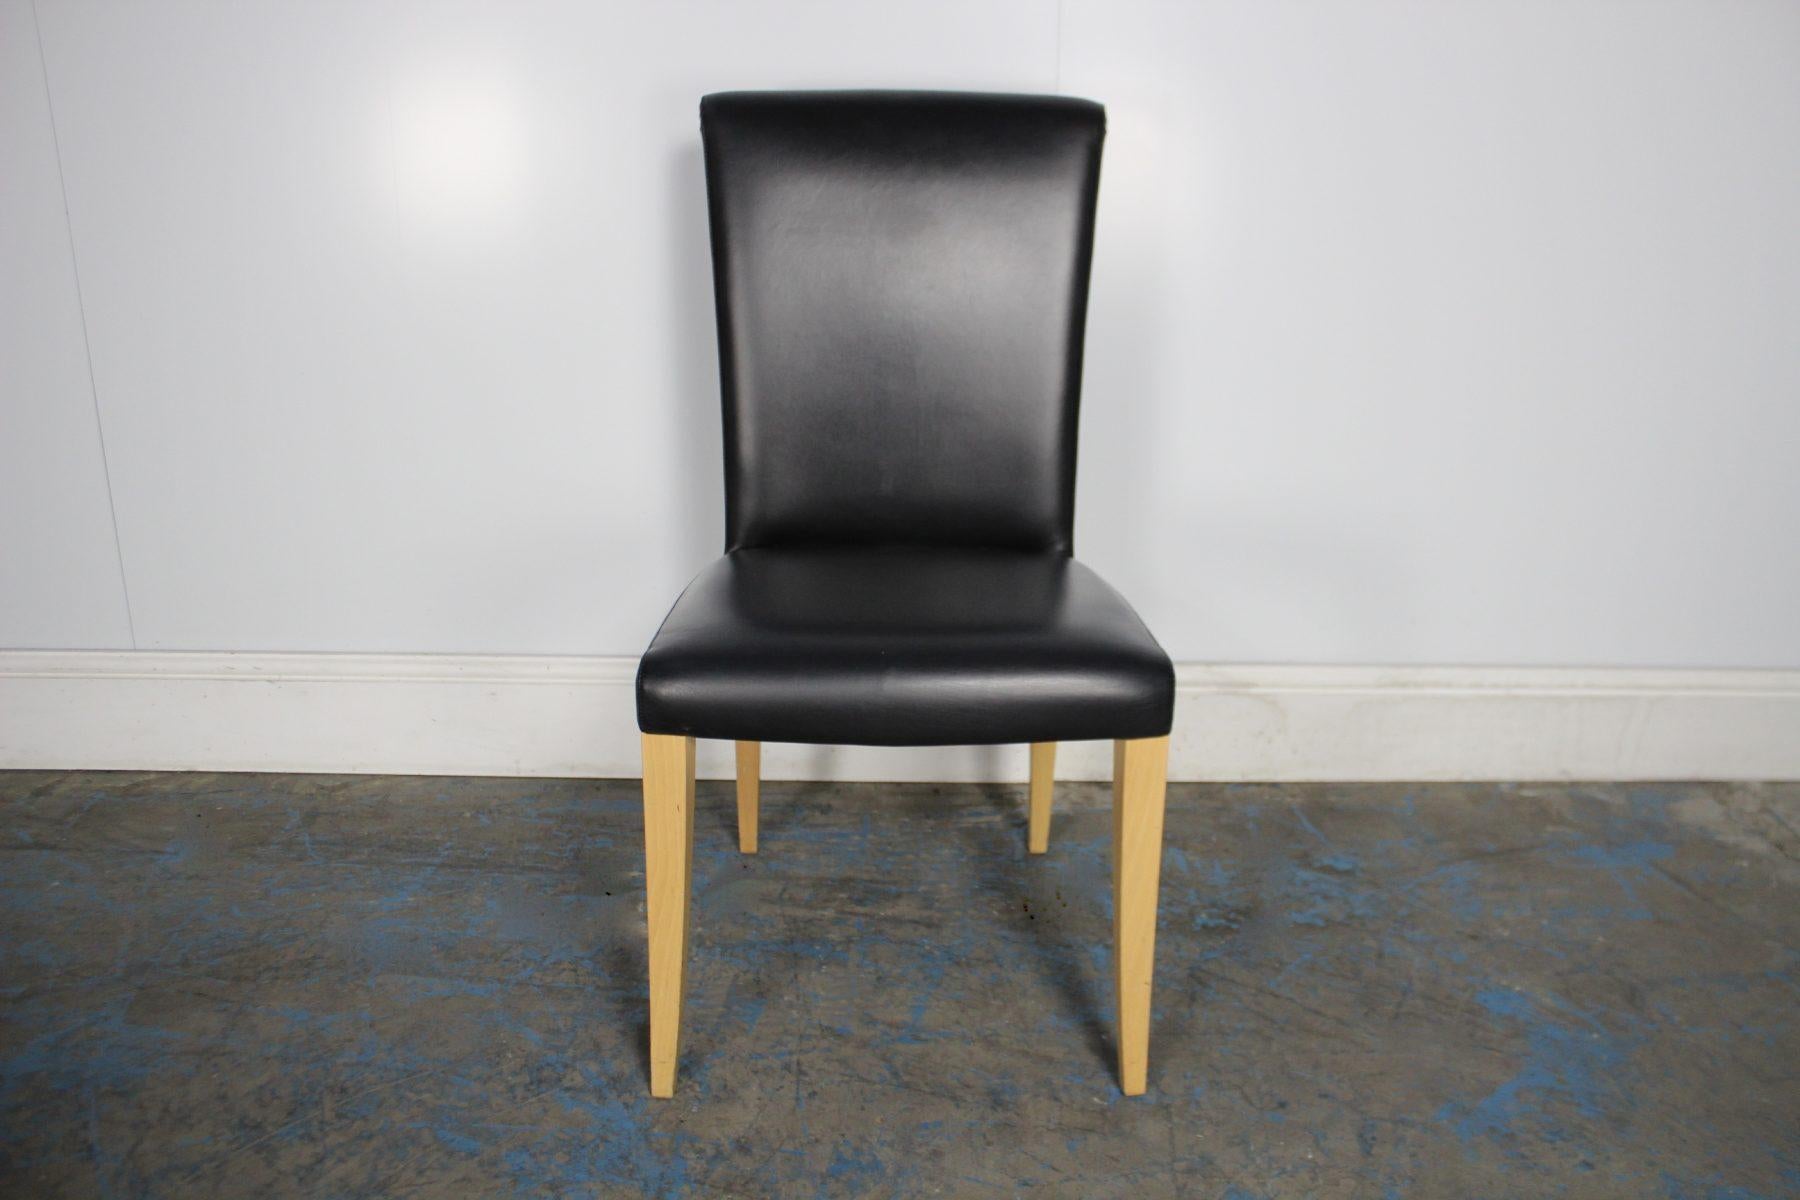 Contemporary Superb Suite of 12 Poltrona Frau “Vittoria” Dining Chairs in Black “Pelle Frau” For Sale